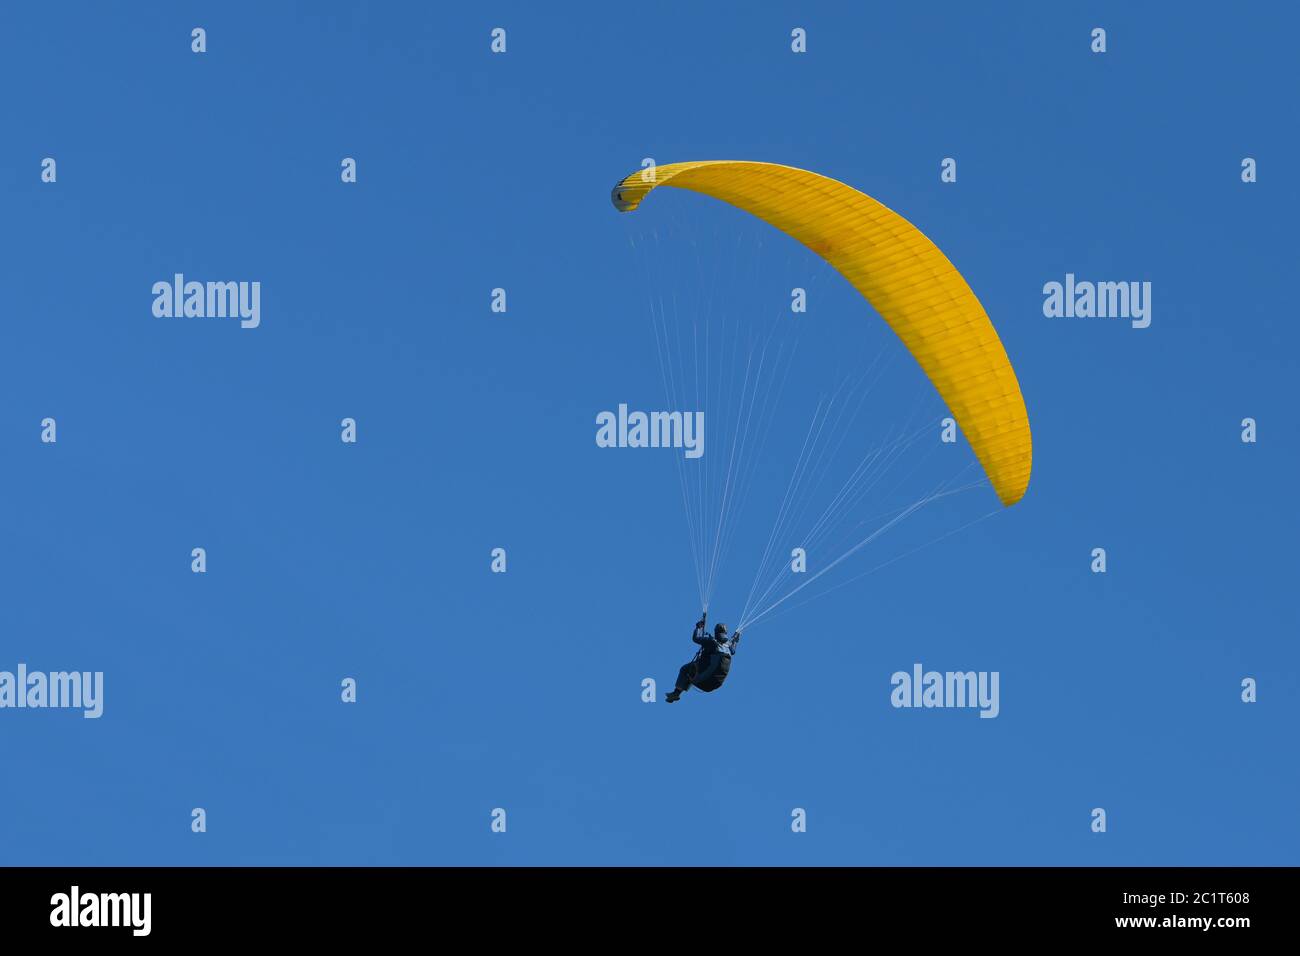 Paraglider pilot with a yellow glider is flying in the clear blue sky, recreational and competitive adventure sport, copy space Stock Photo